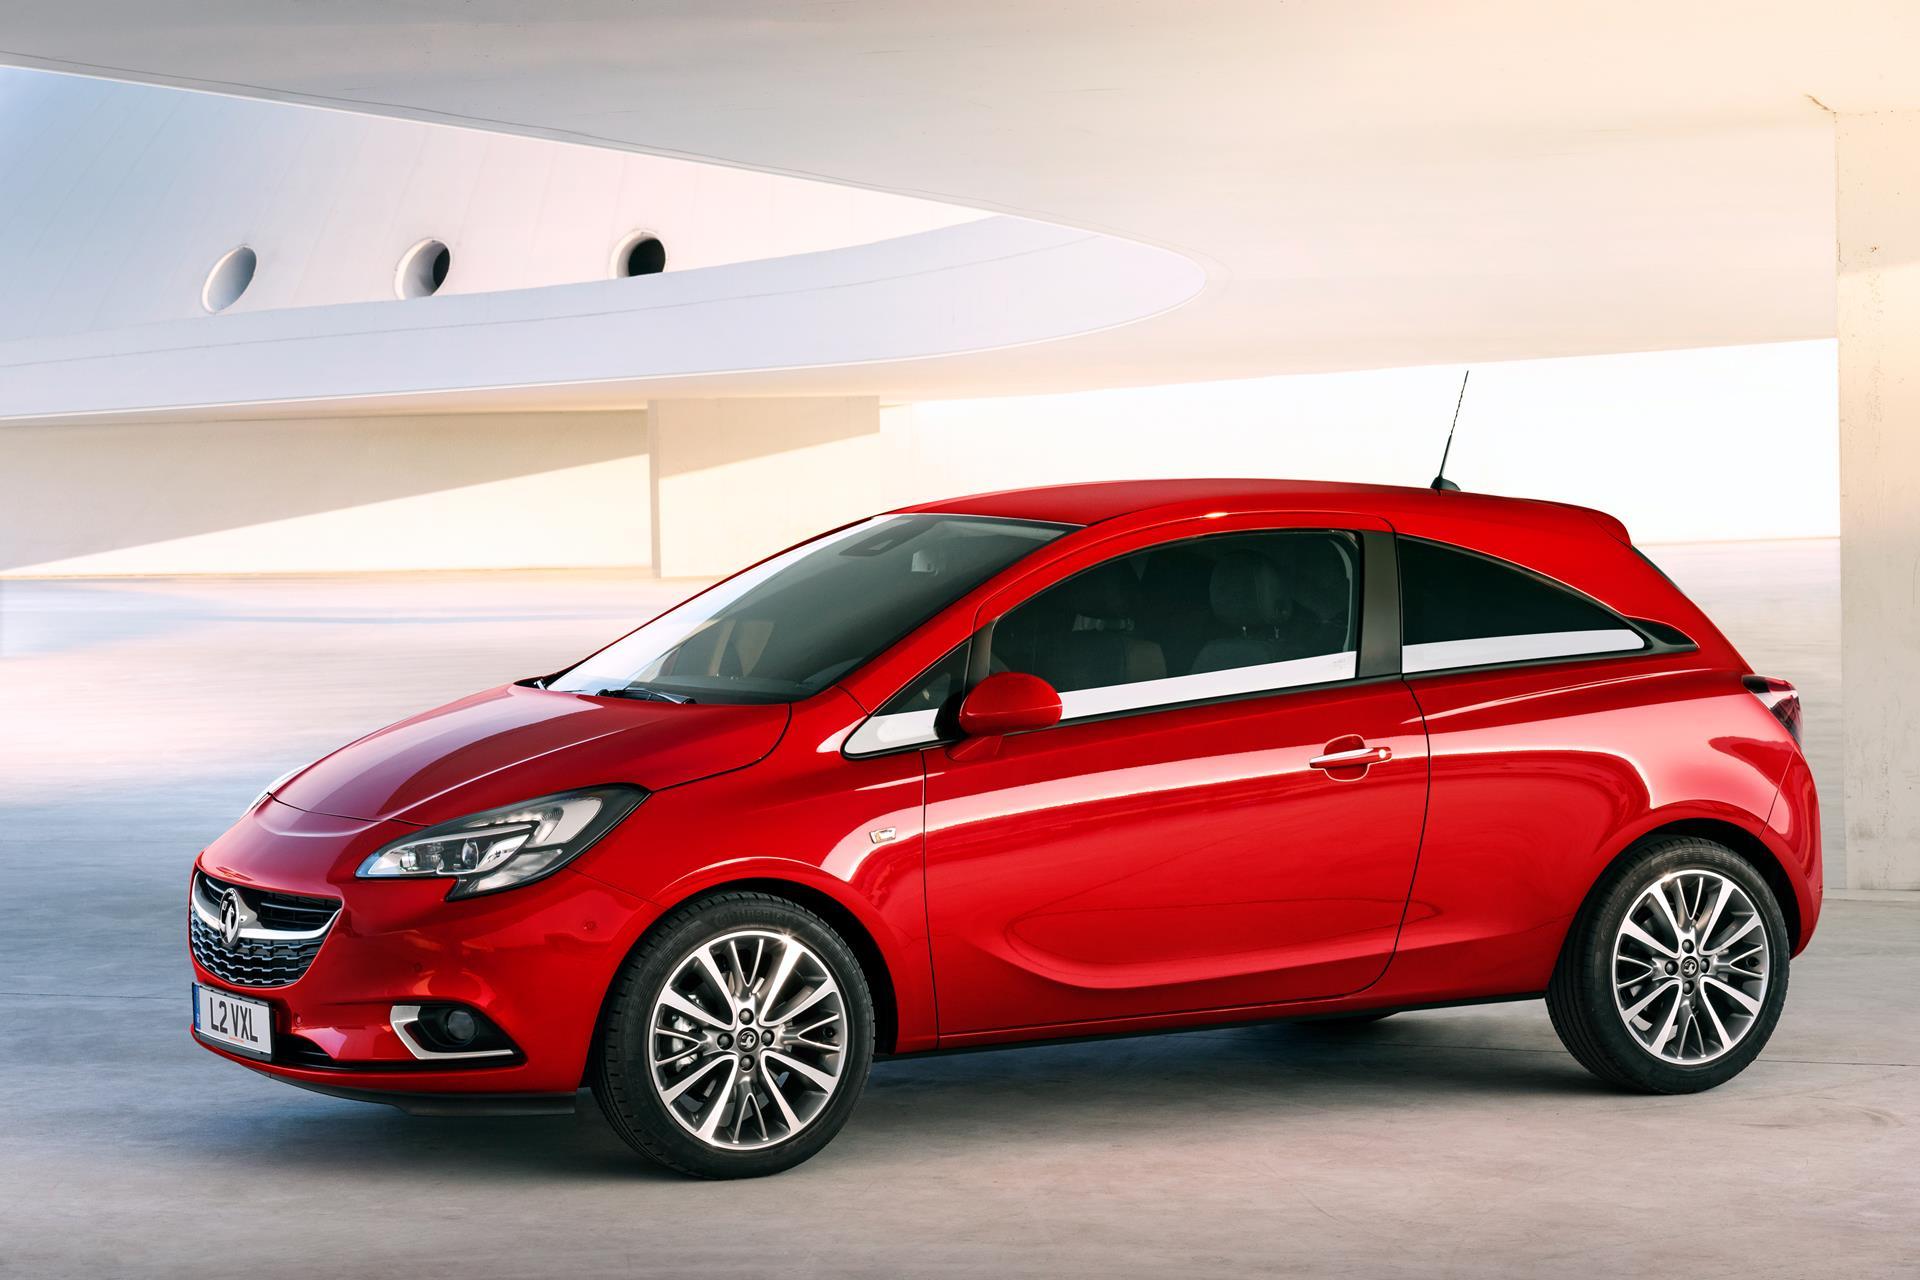 Vauxhall Corsa Wallpaper and Image Gallery